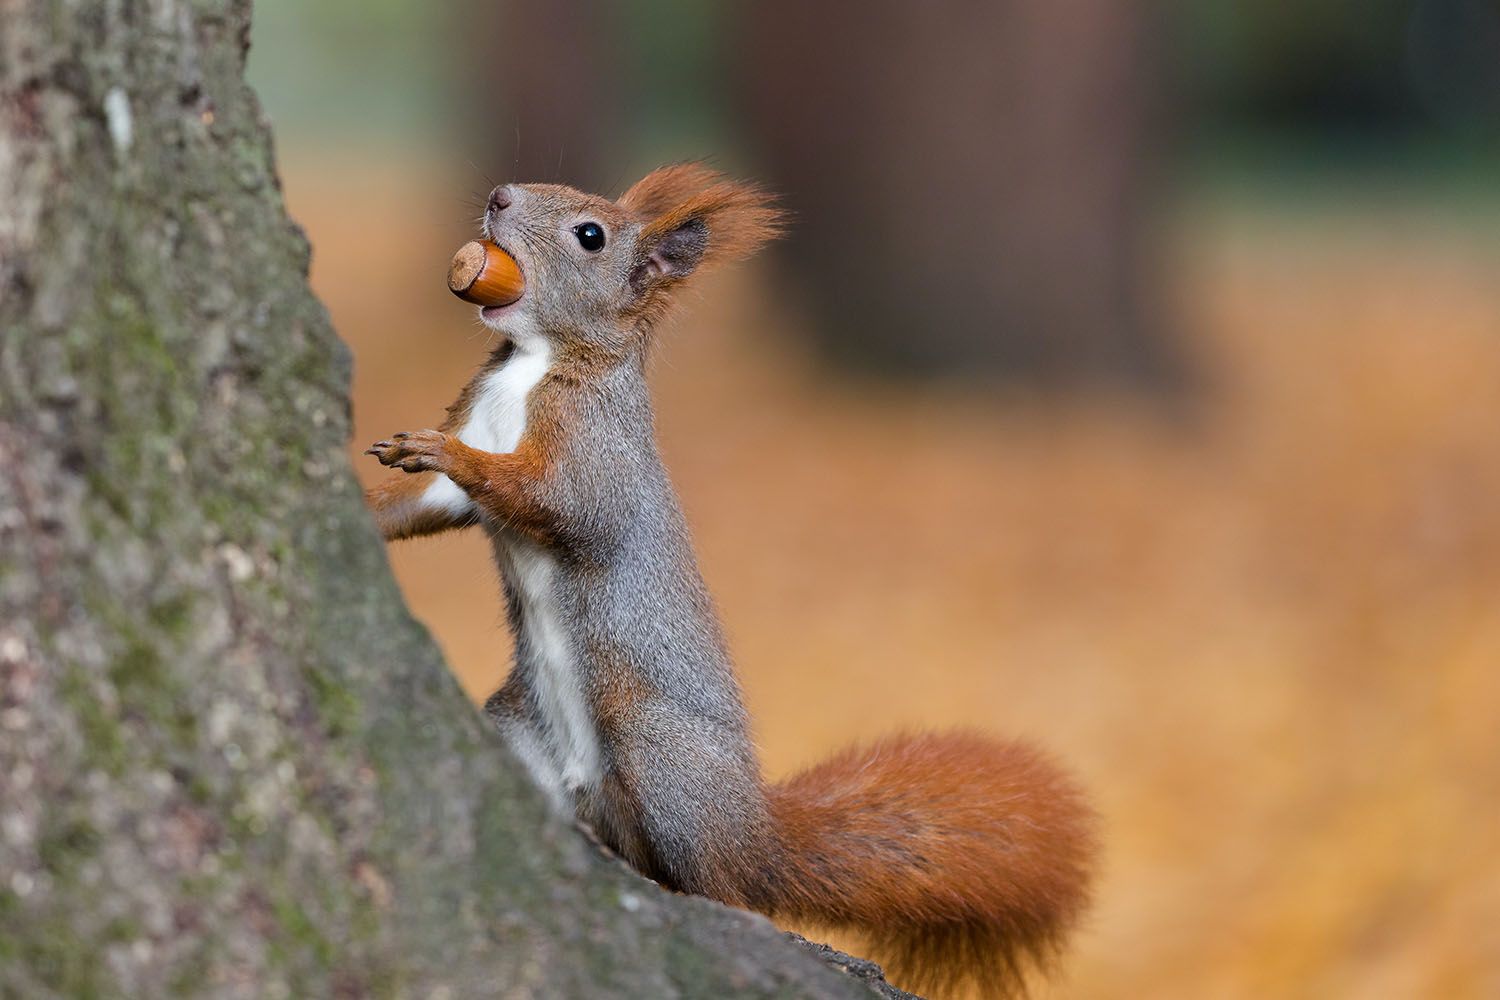 A squirrel with an acorn in its mouth pauses at the foot of a tree